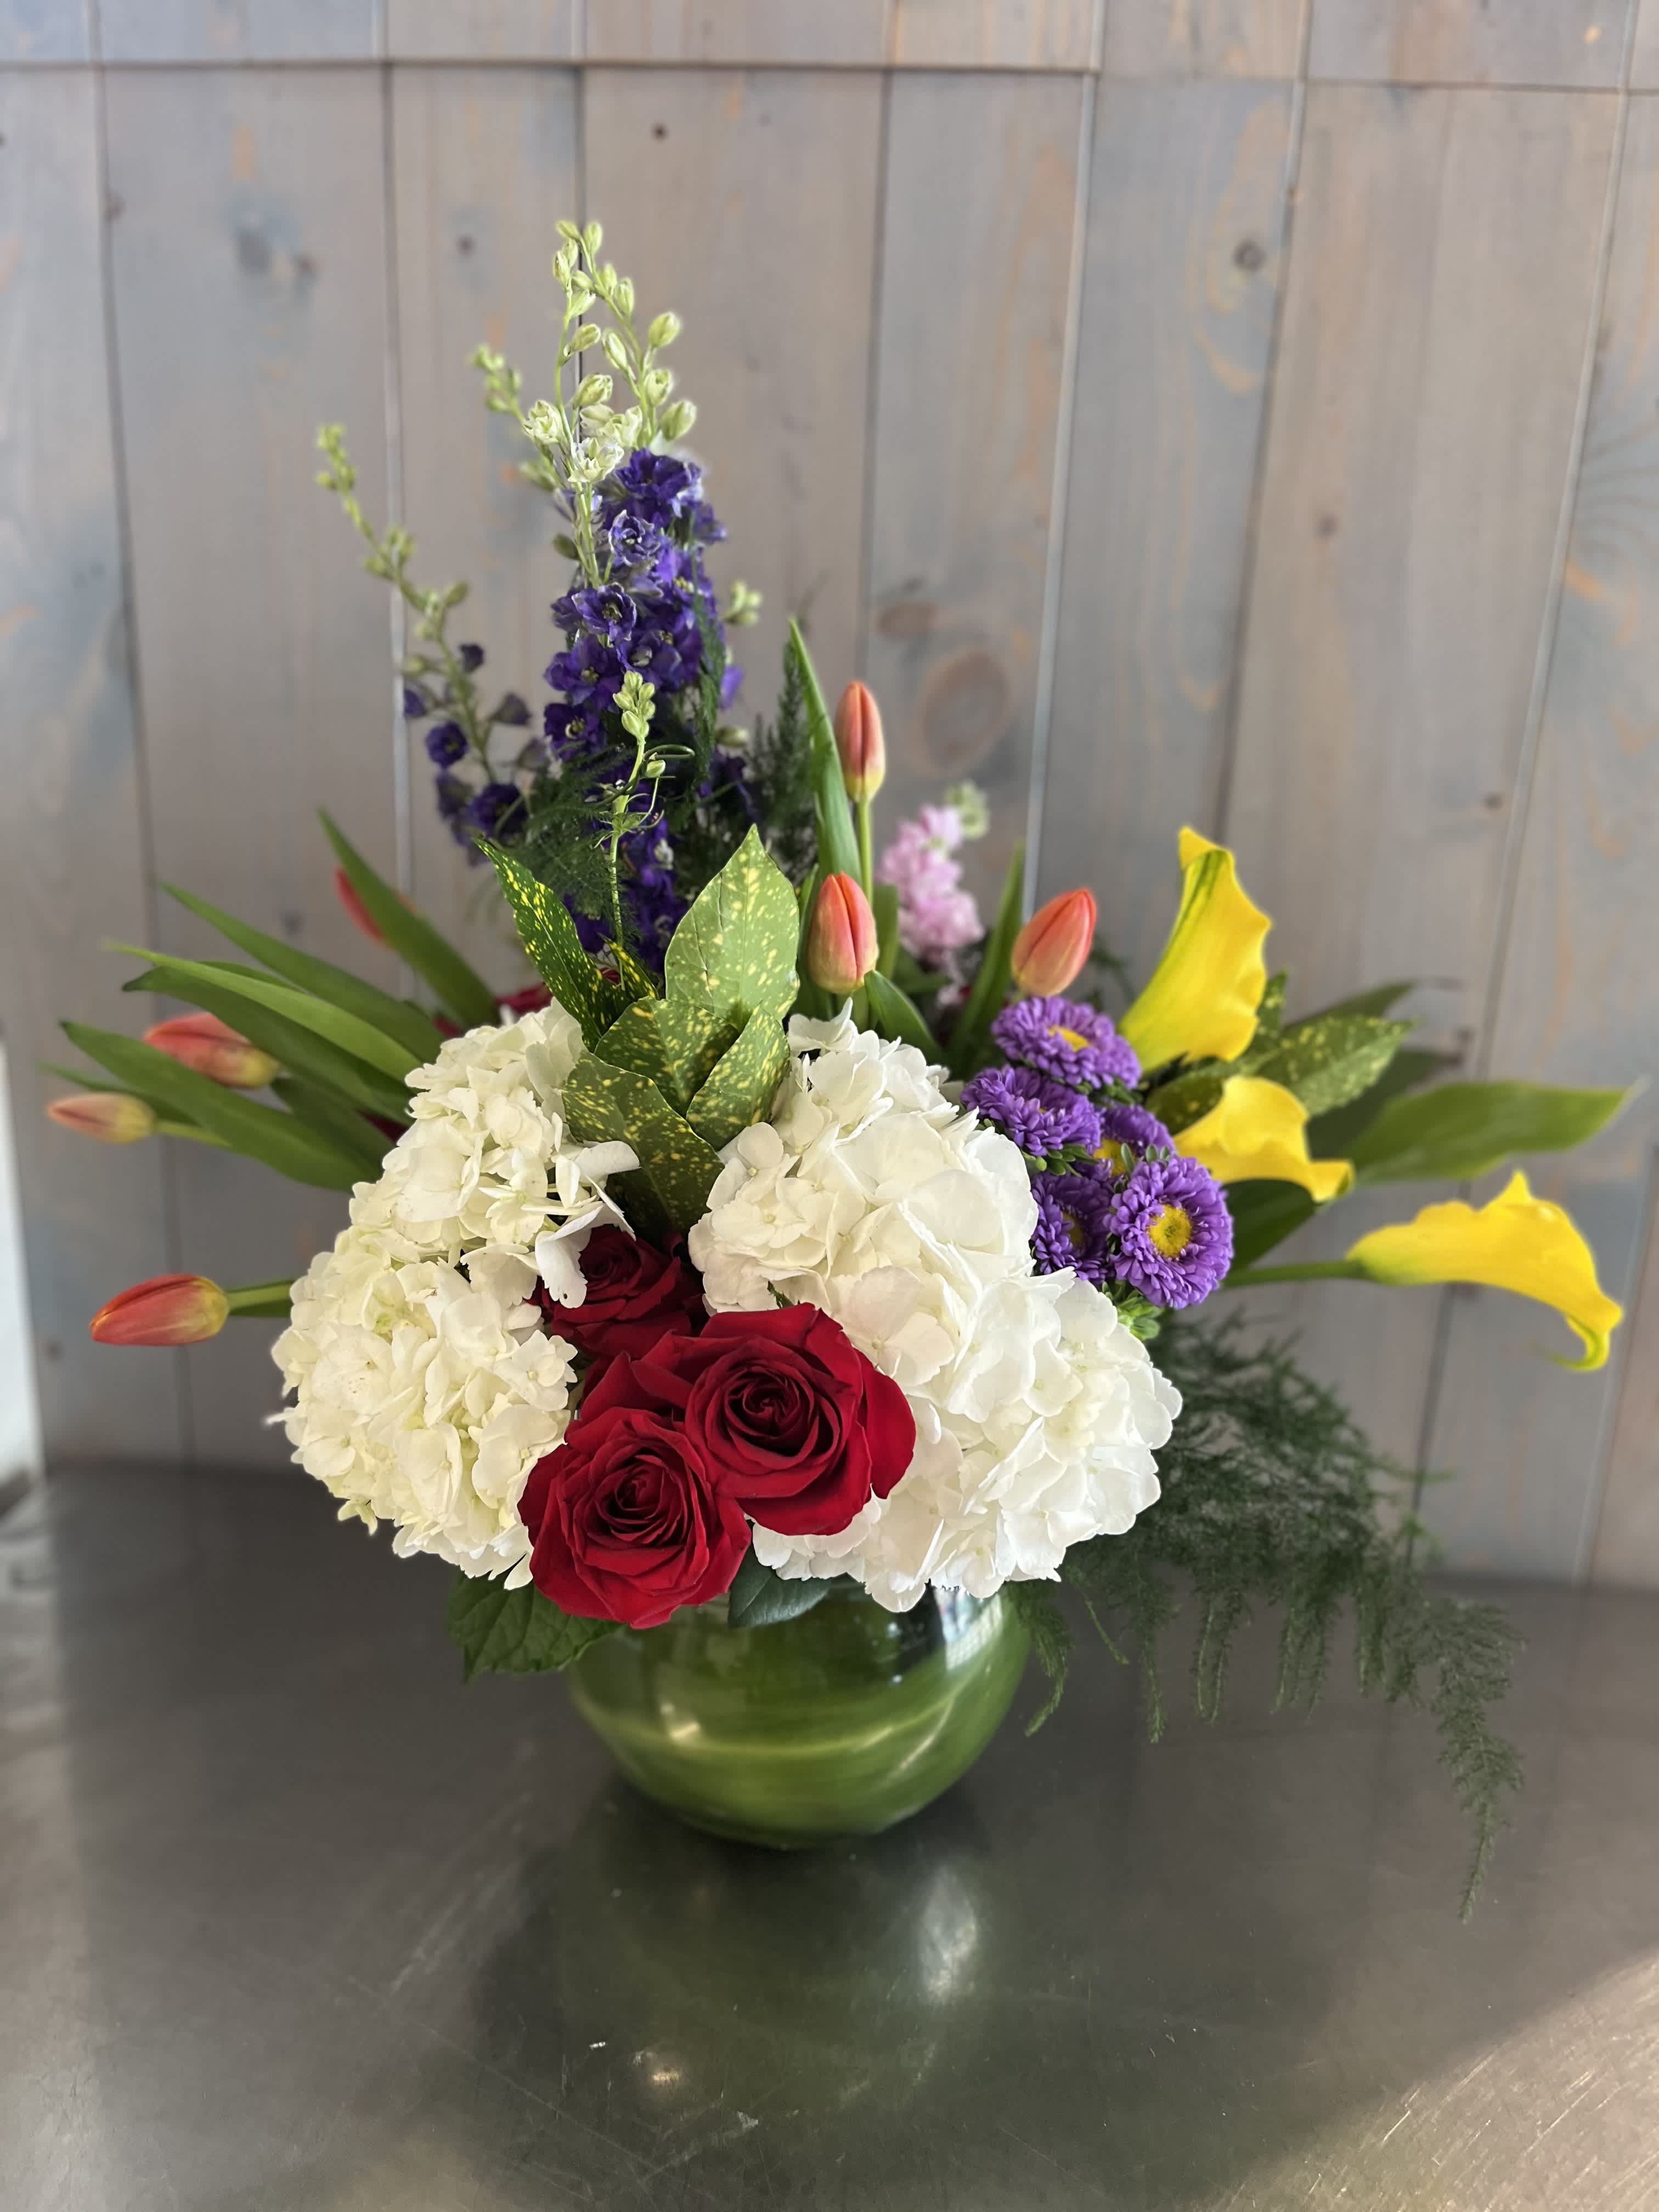 Motherly Love  - Special Arrangement for that special one . Roses, Hydrangeas, Calla Lillies, Tulips